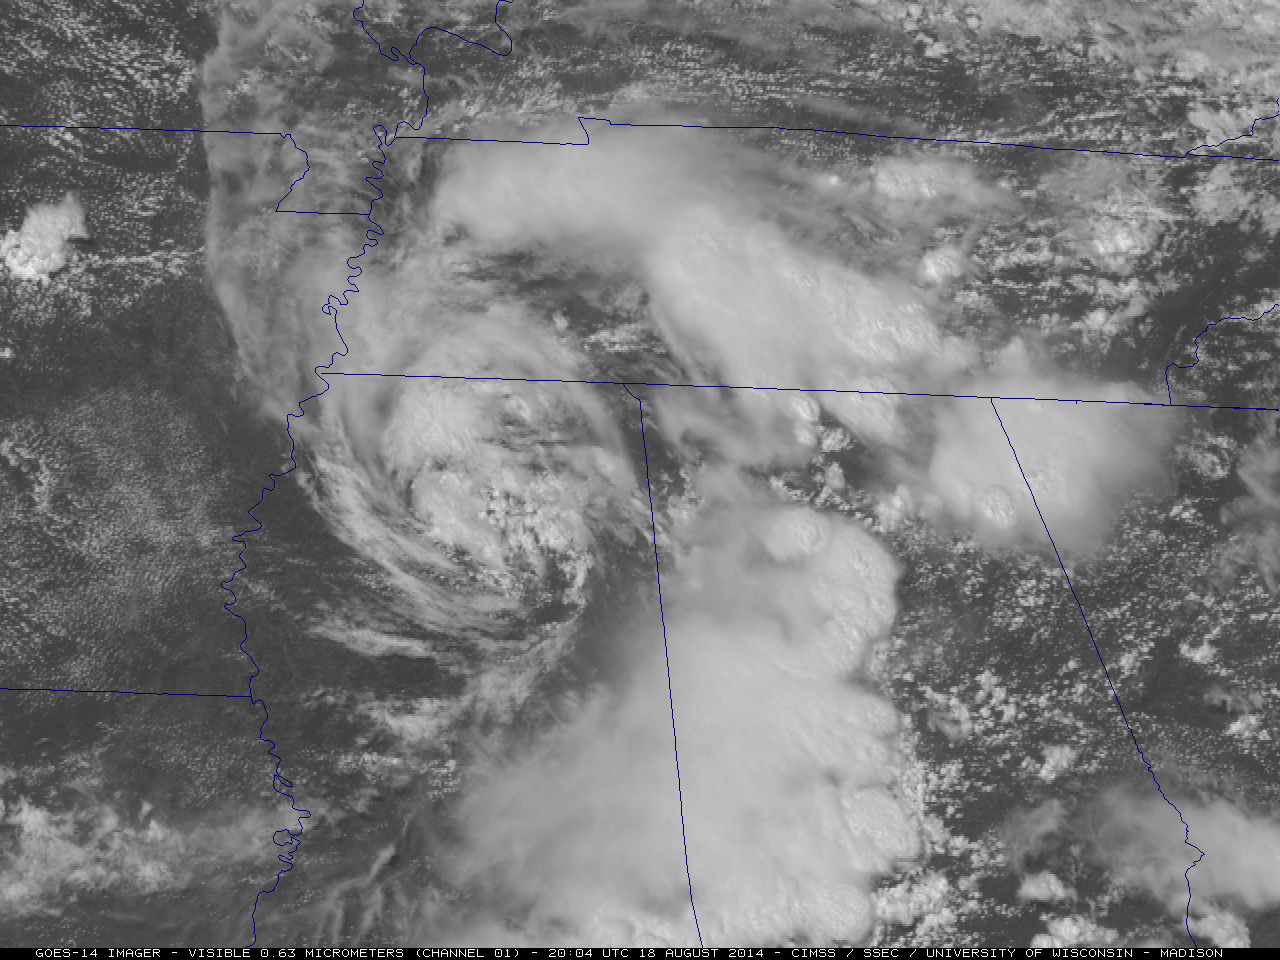 GOES-14 0.63 µm visible channel images (click to play animation)